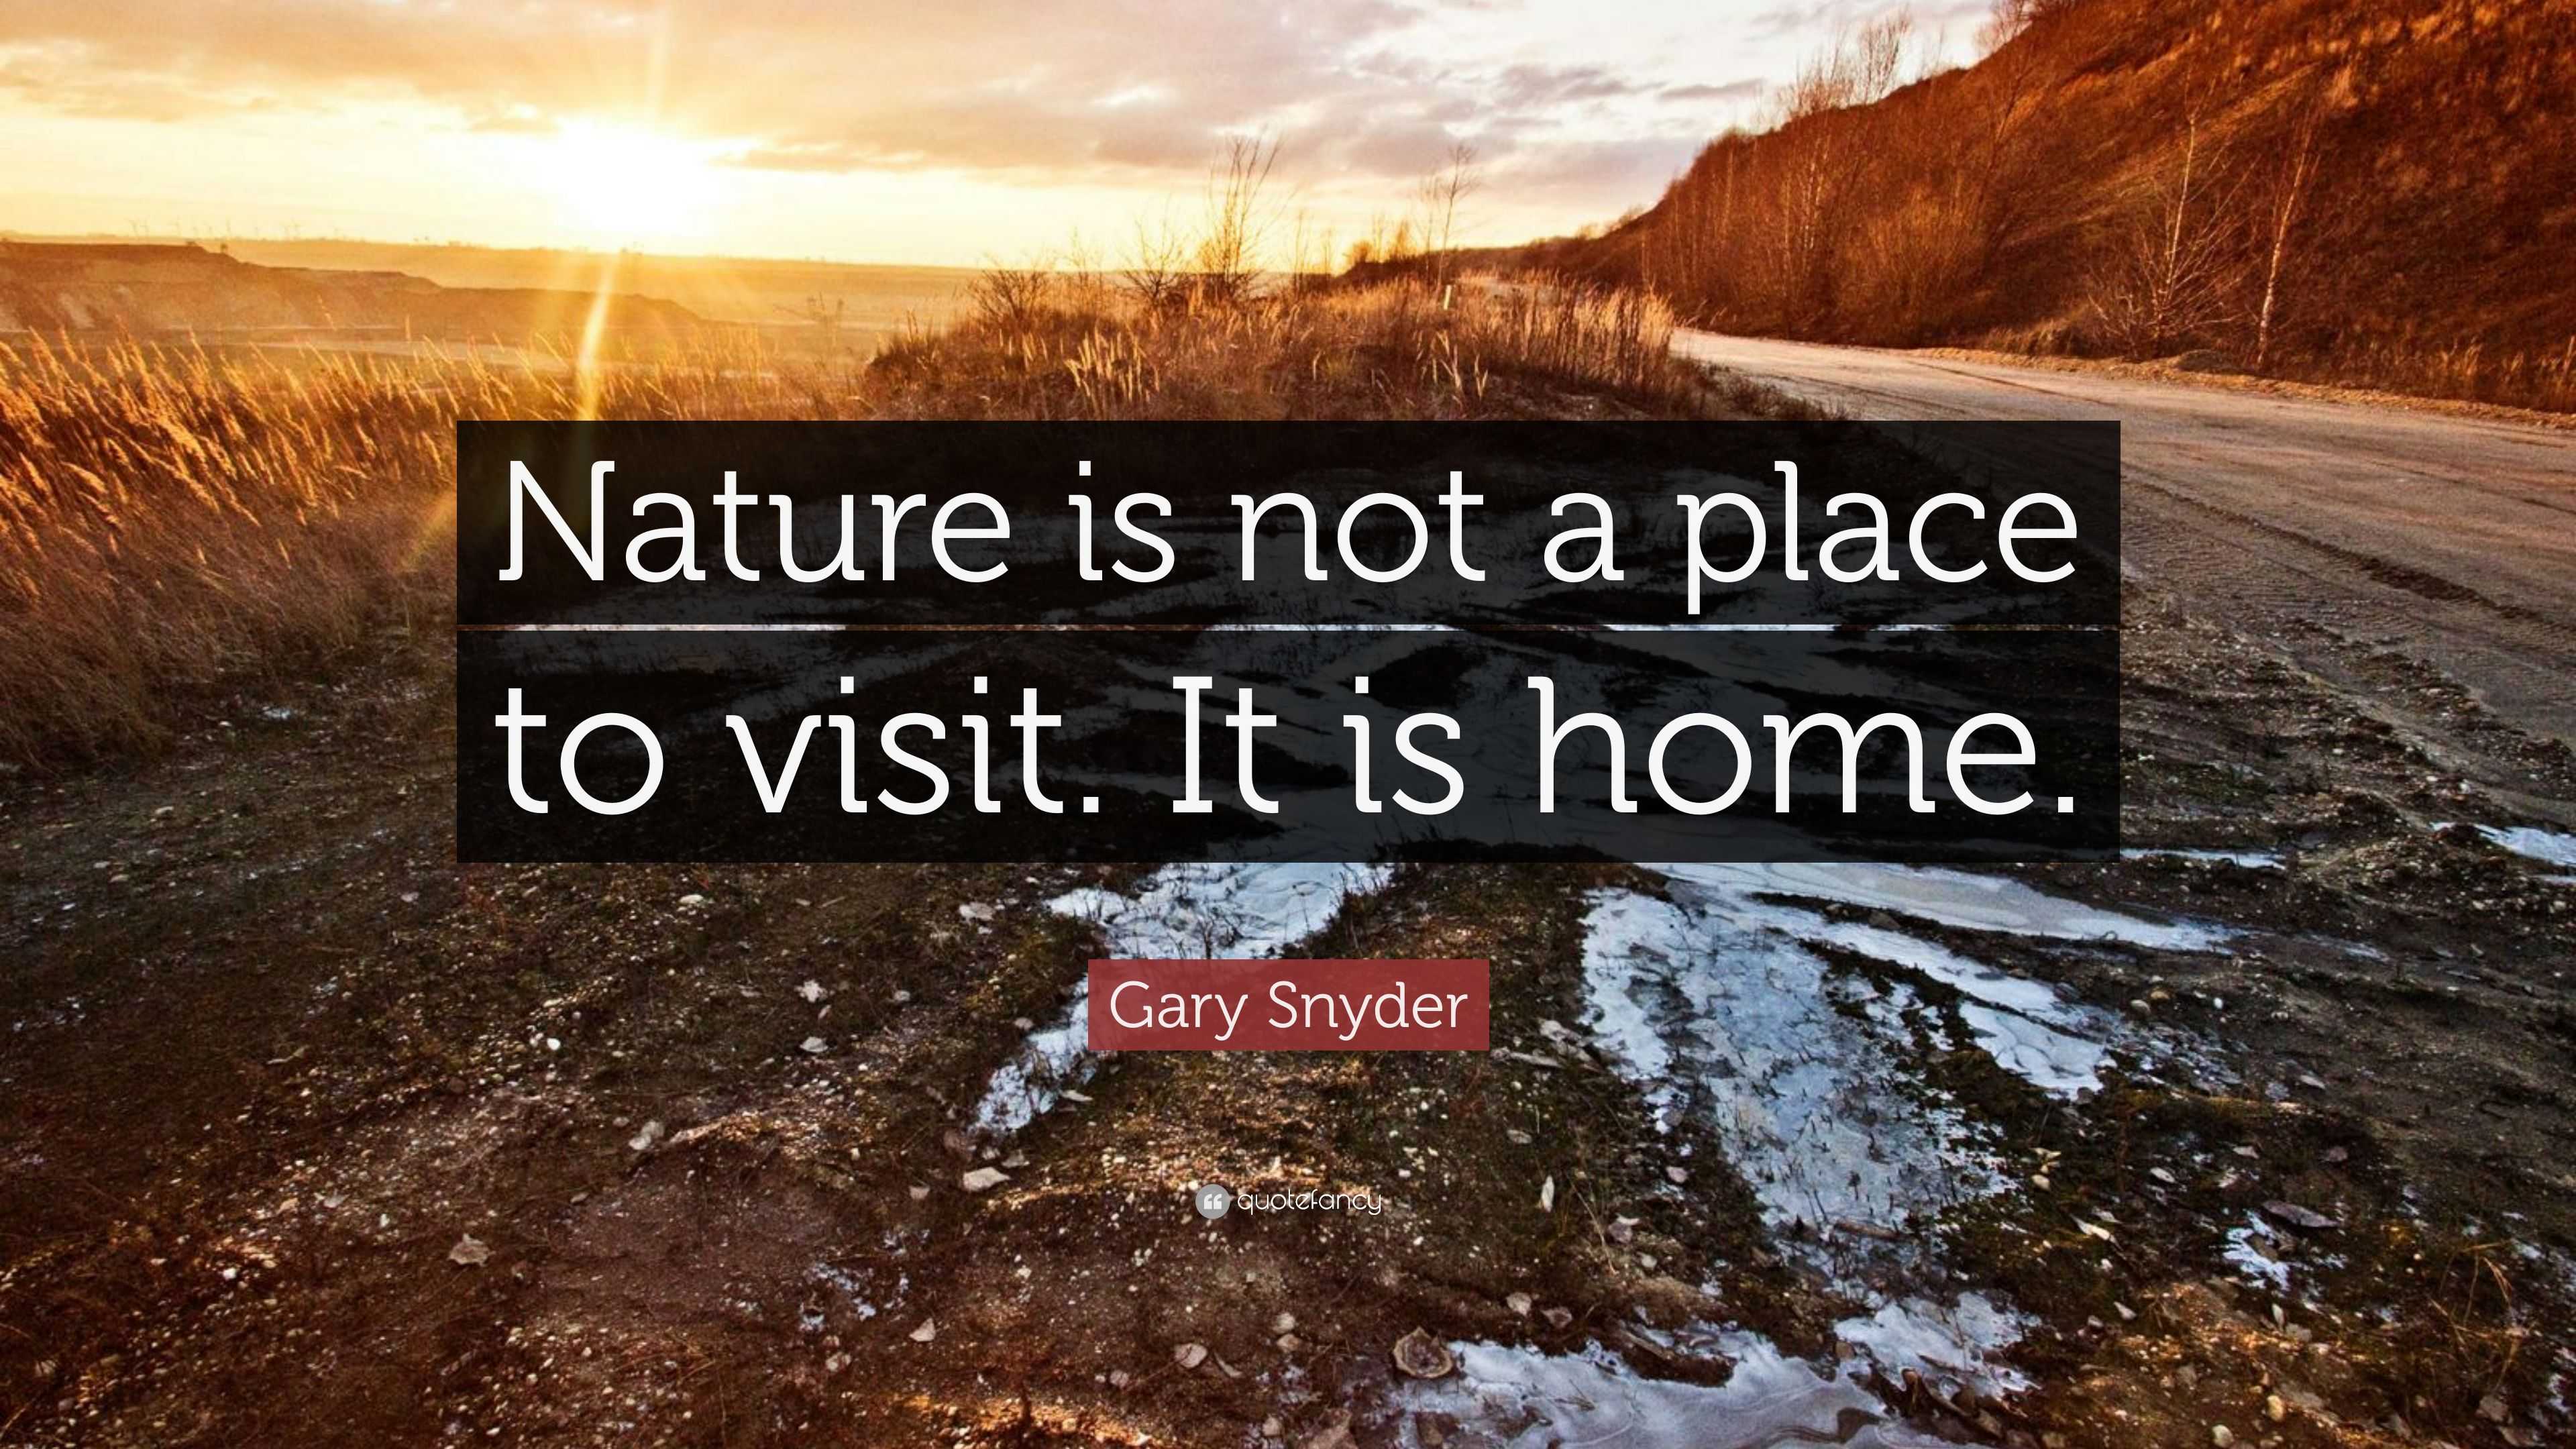 Gary Snyder Quote “Nature is not a place to visit. It is home.” (12